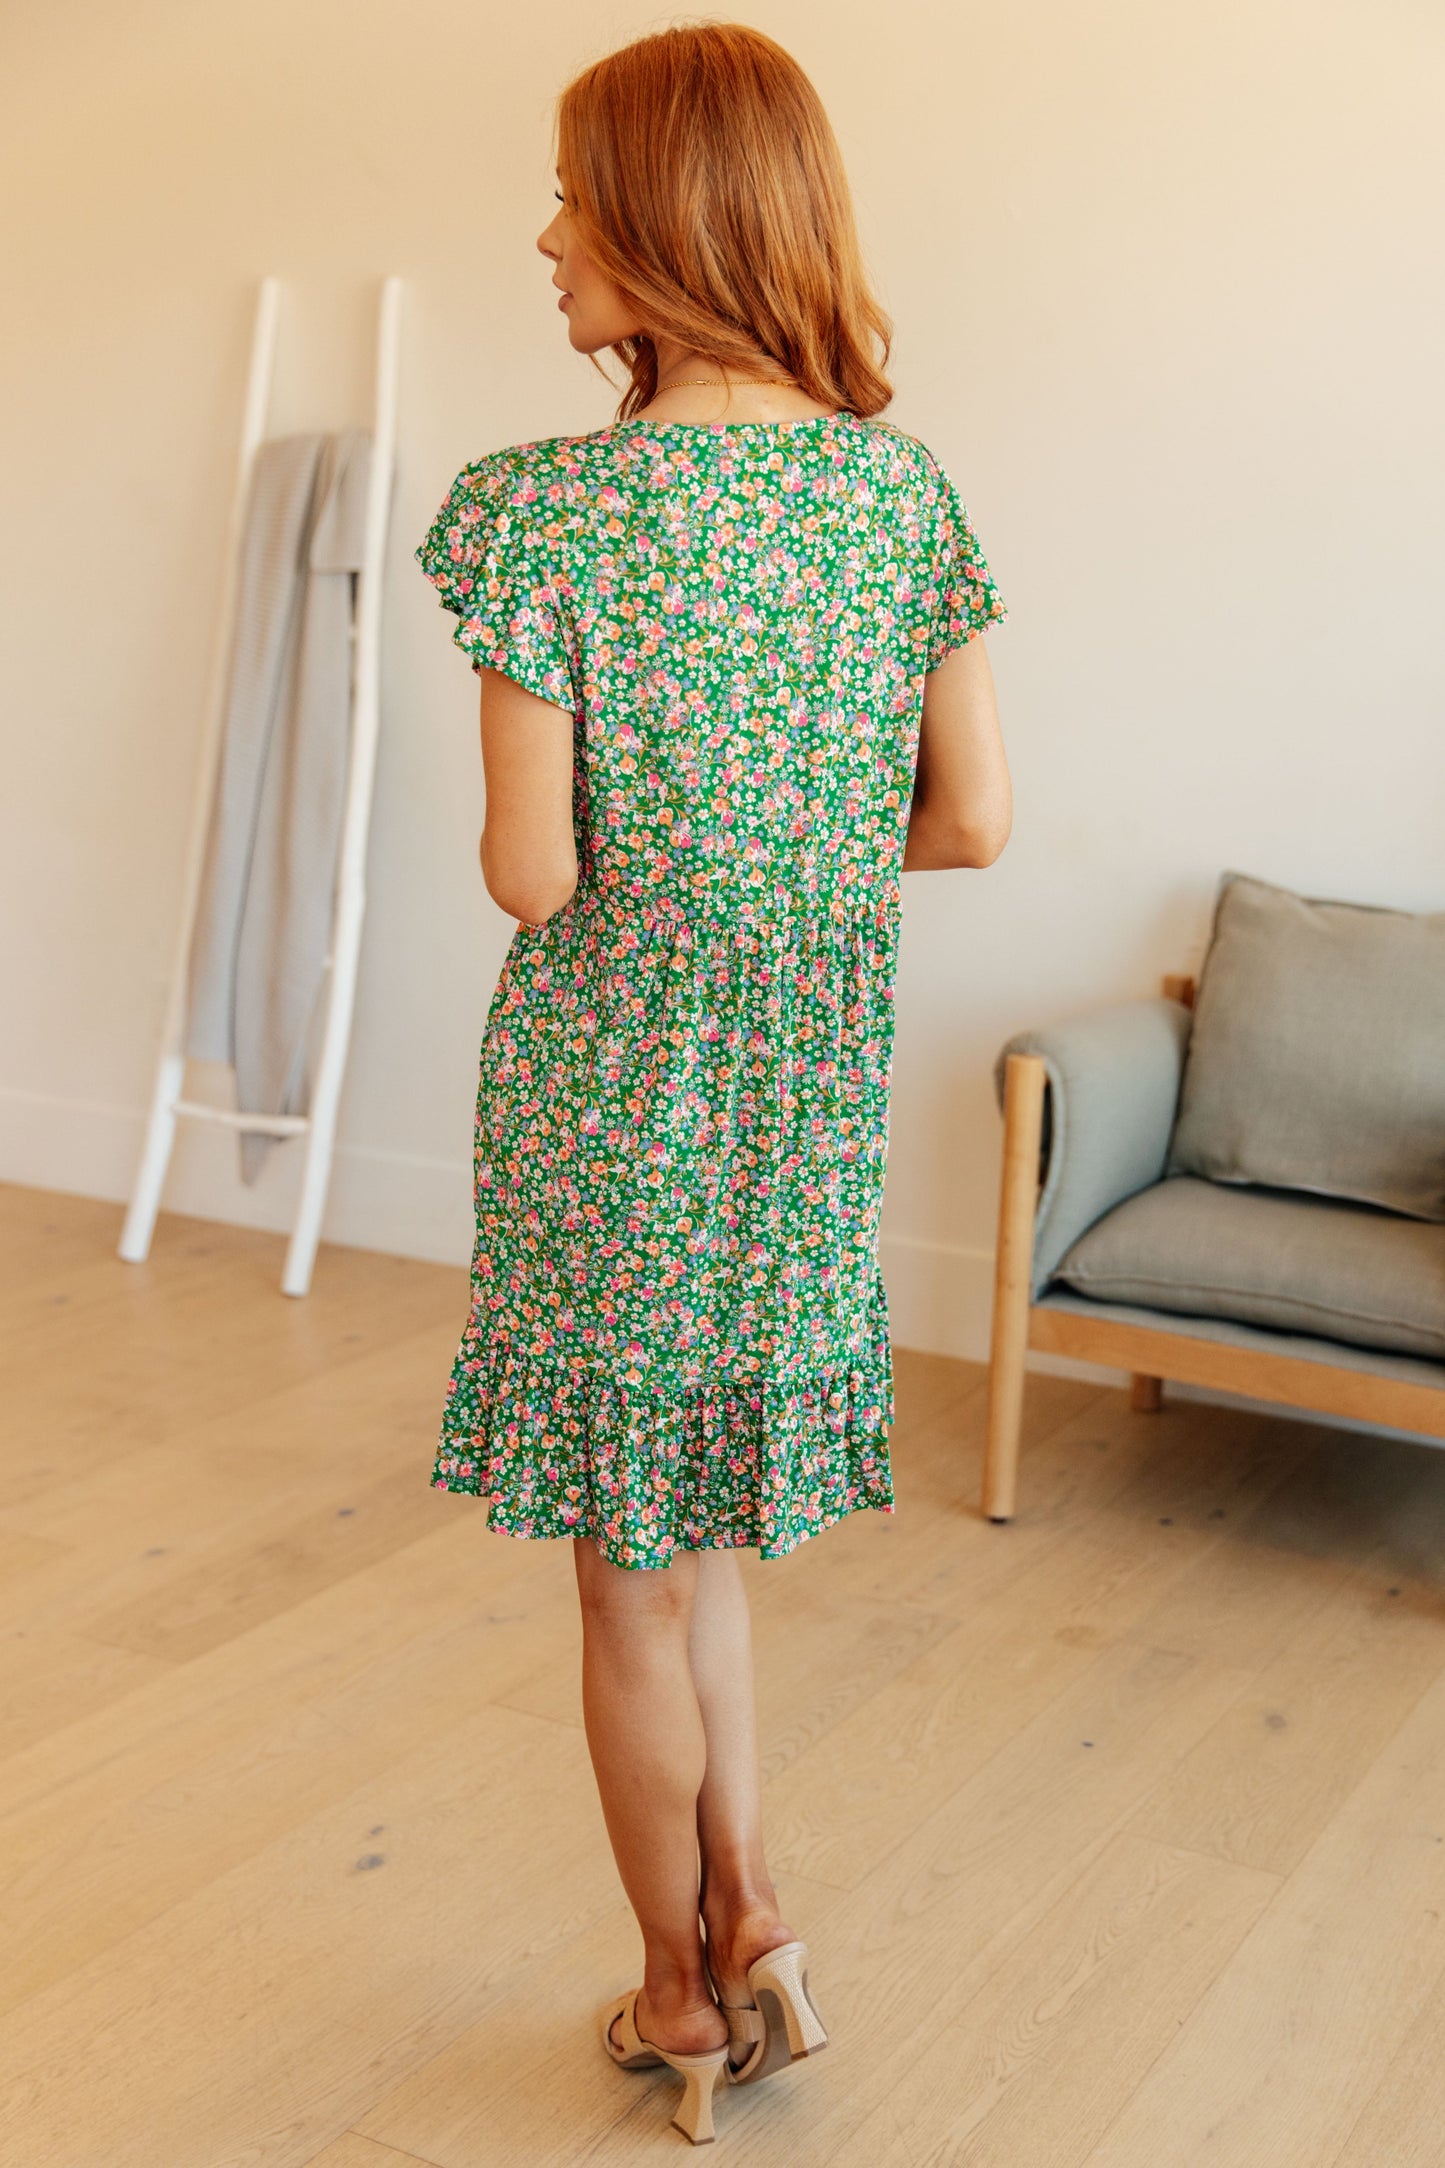 Can't Fight the Feeling Floral Dress in Green (Online Exclusive)